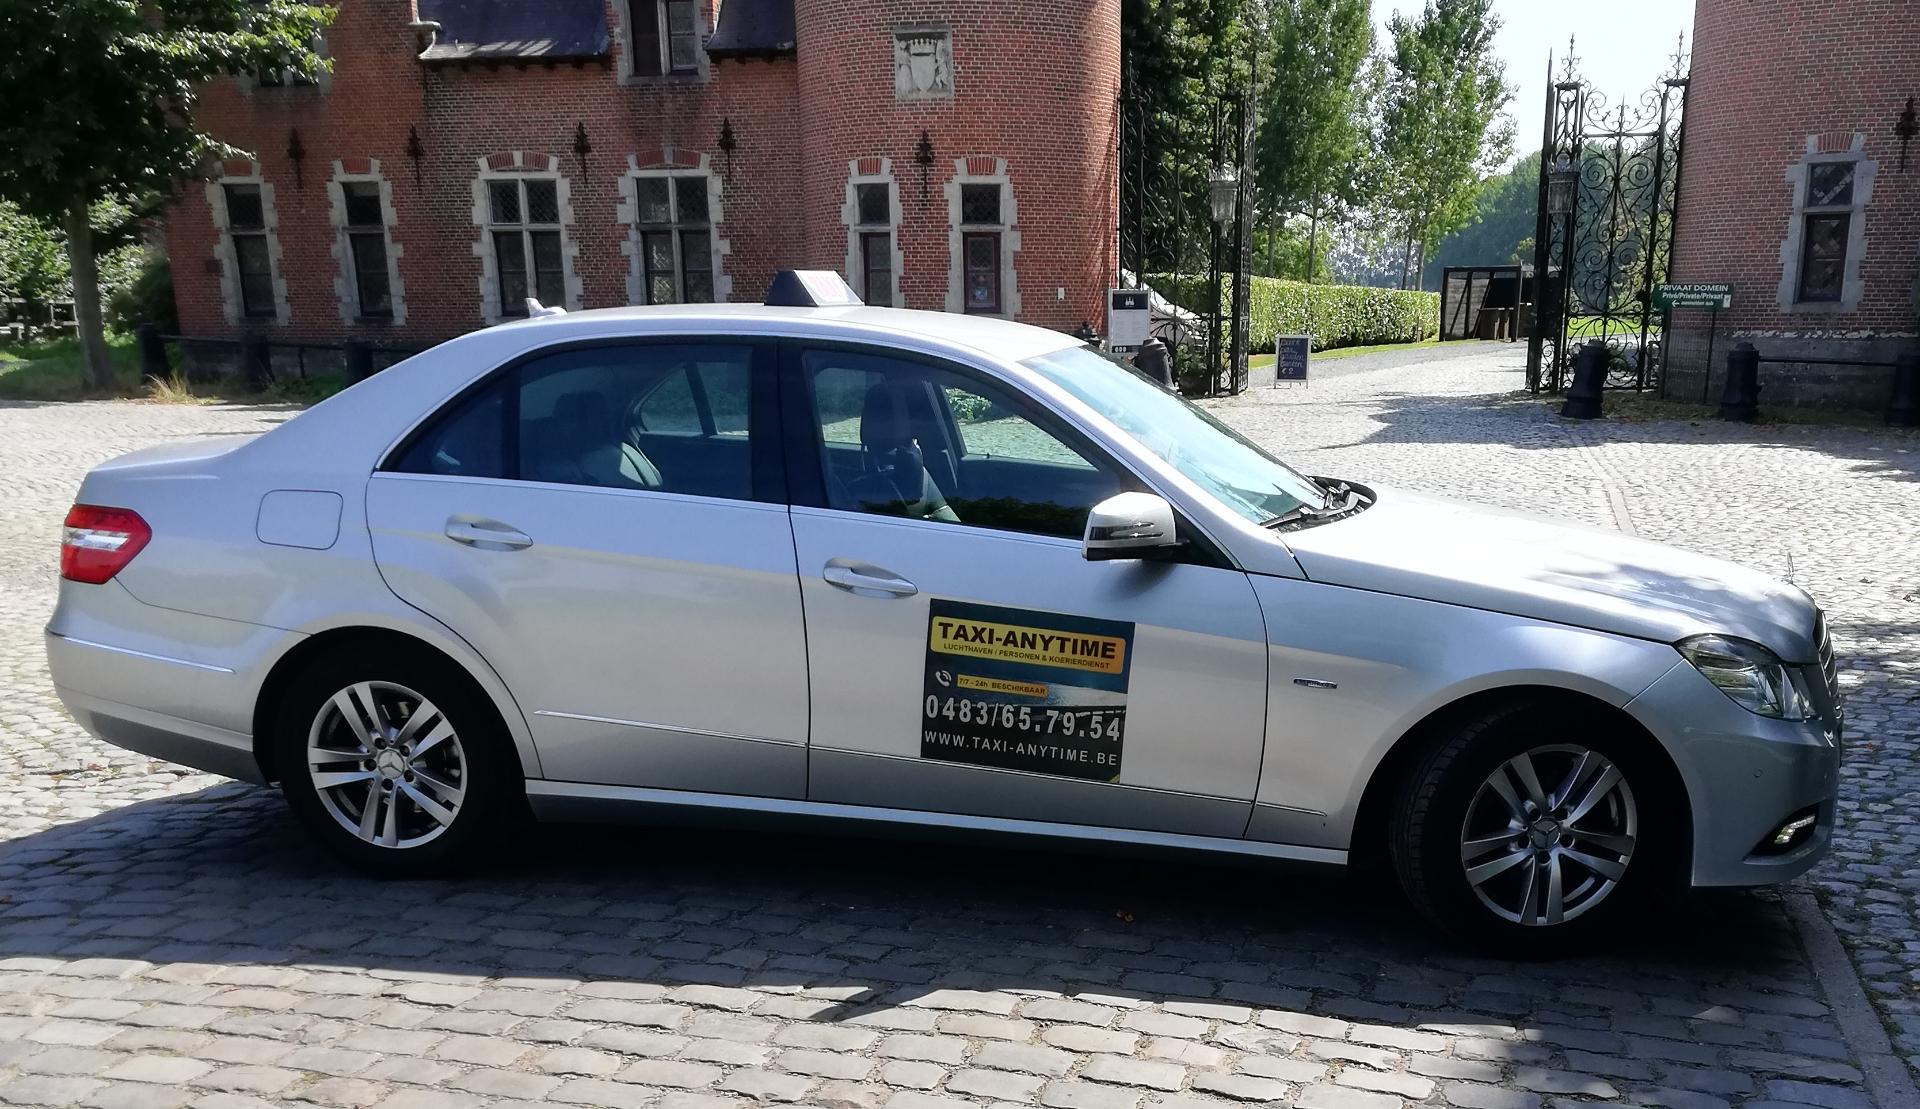 luxe-autoverhuurders Zaventem Taxi-Anytime